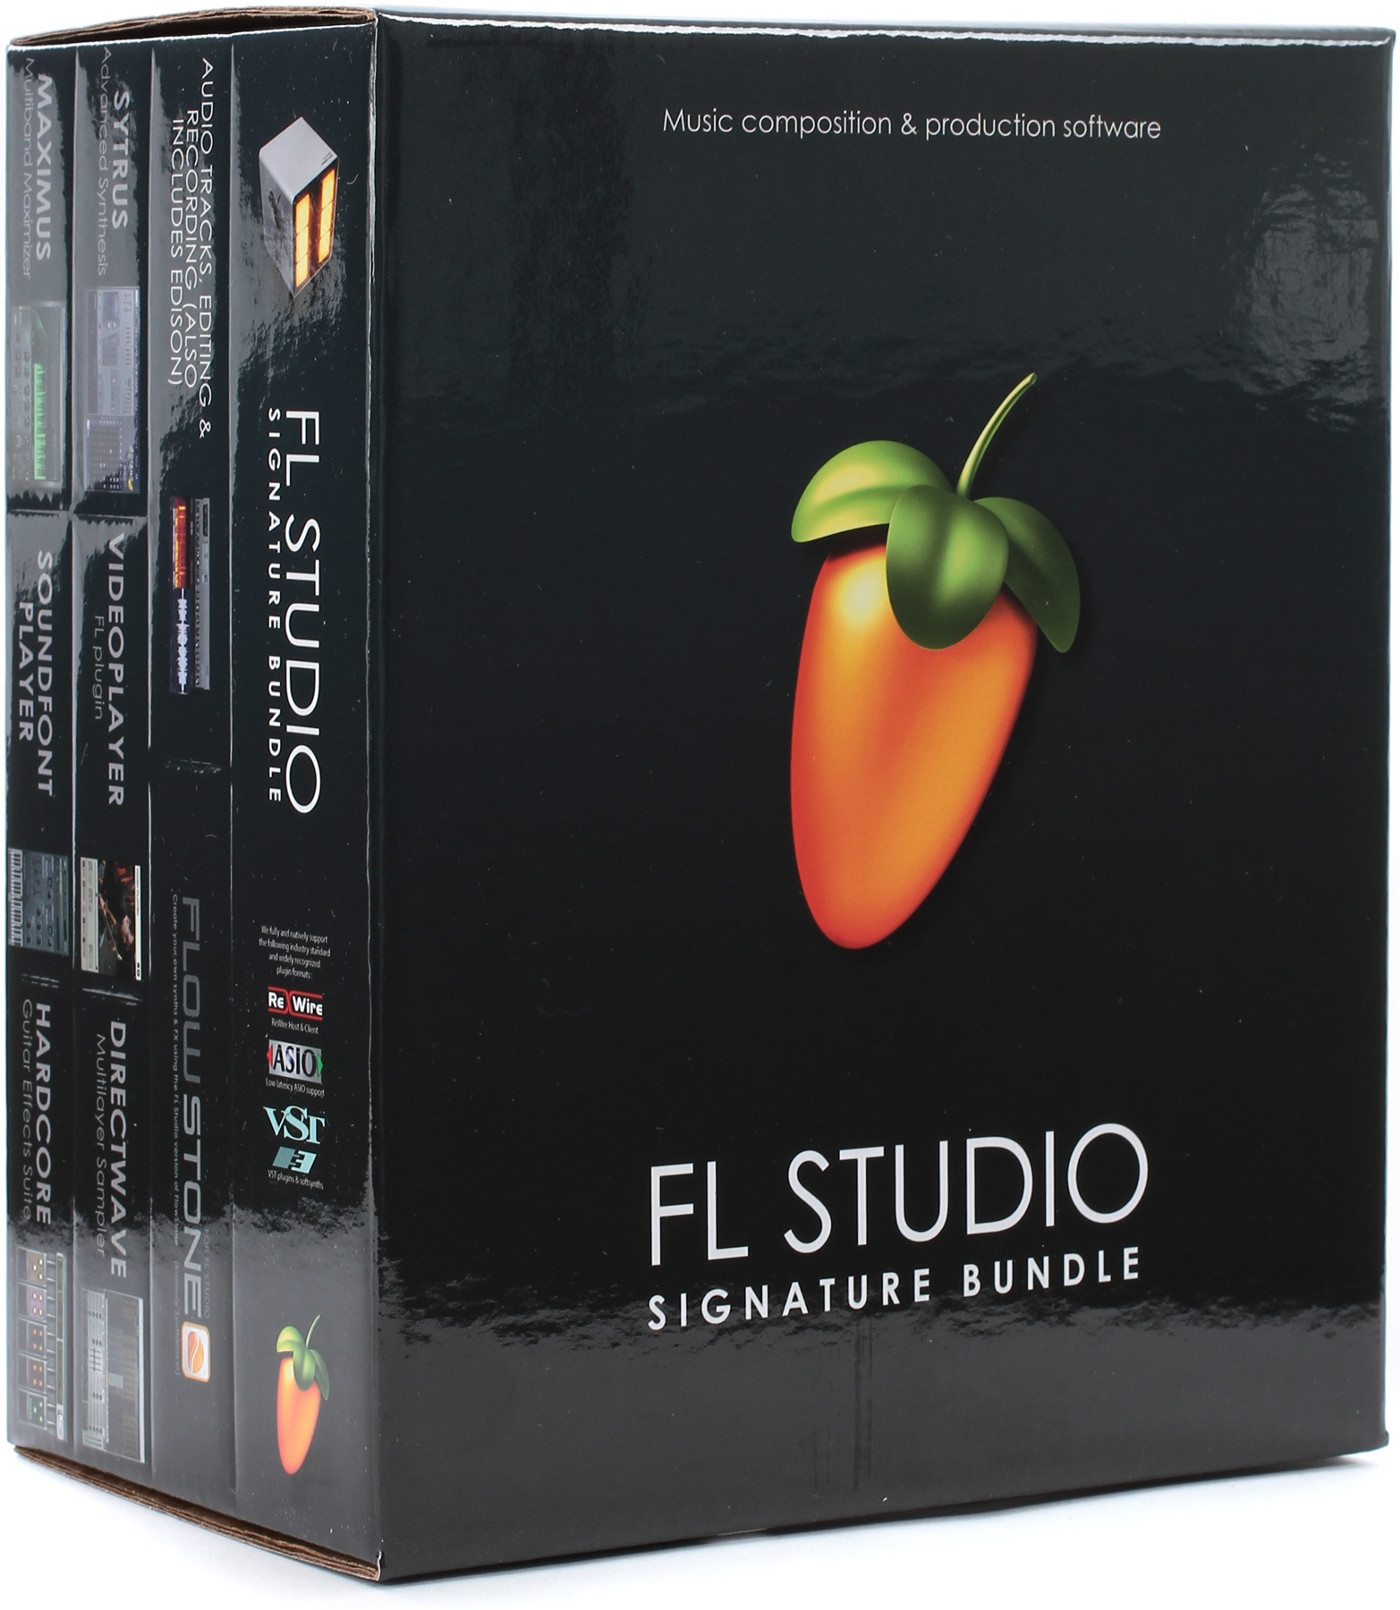 fruity loops all plugins edition